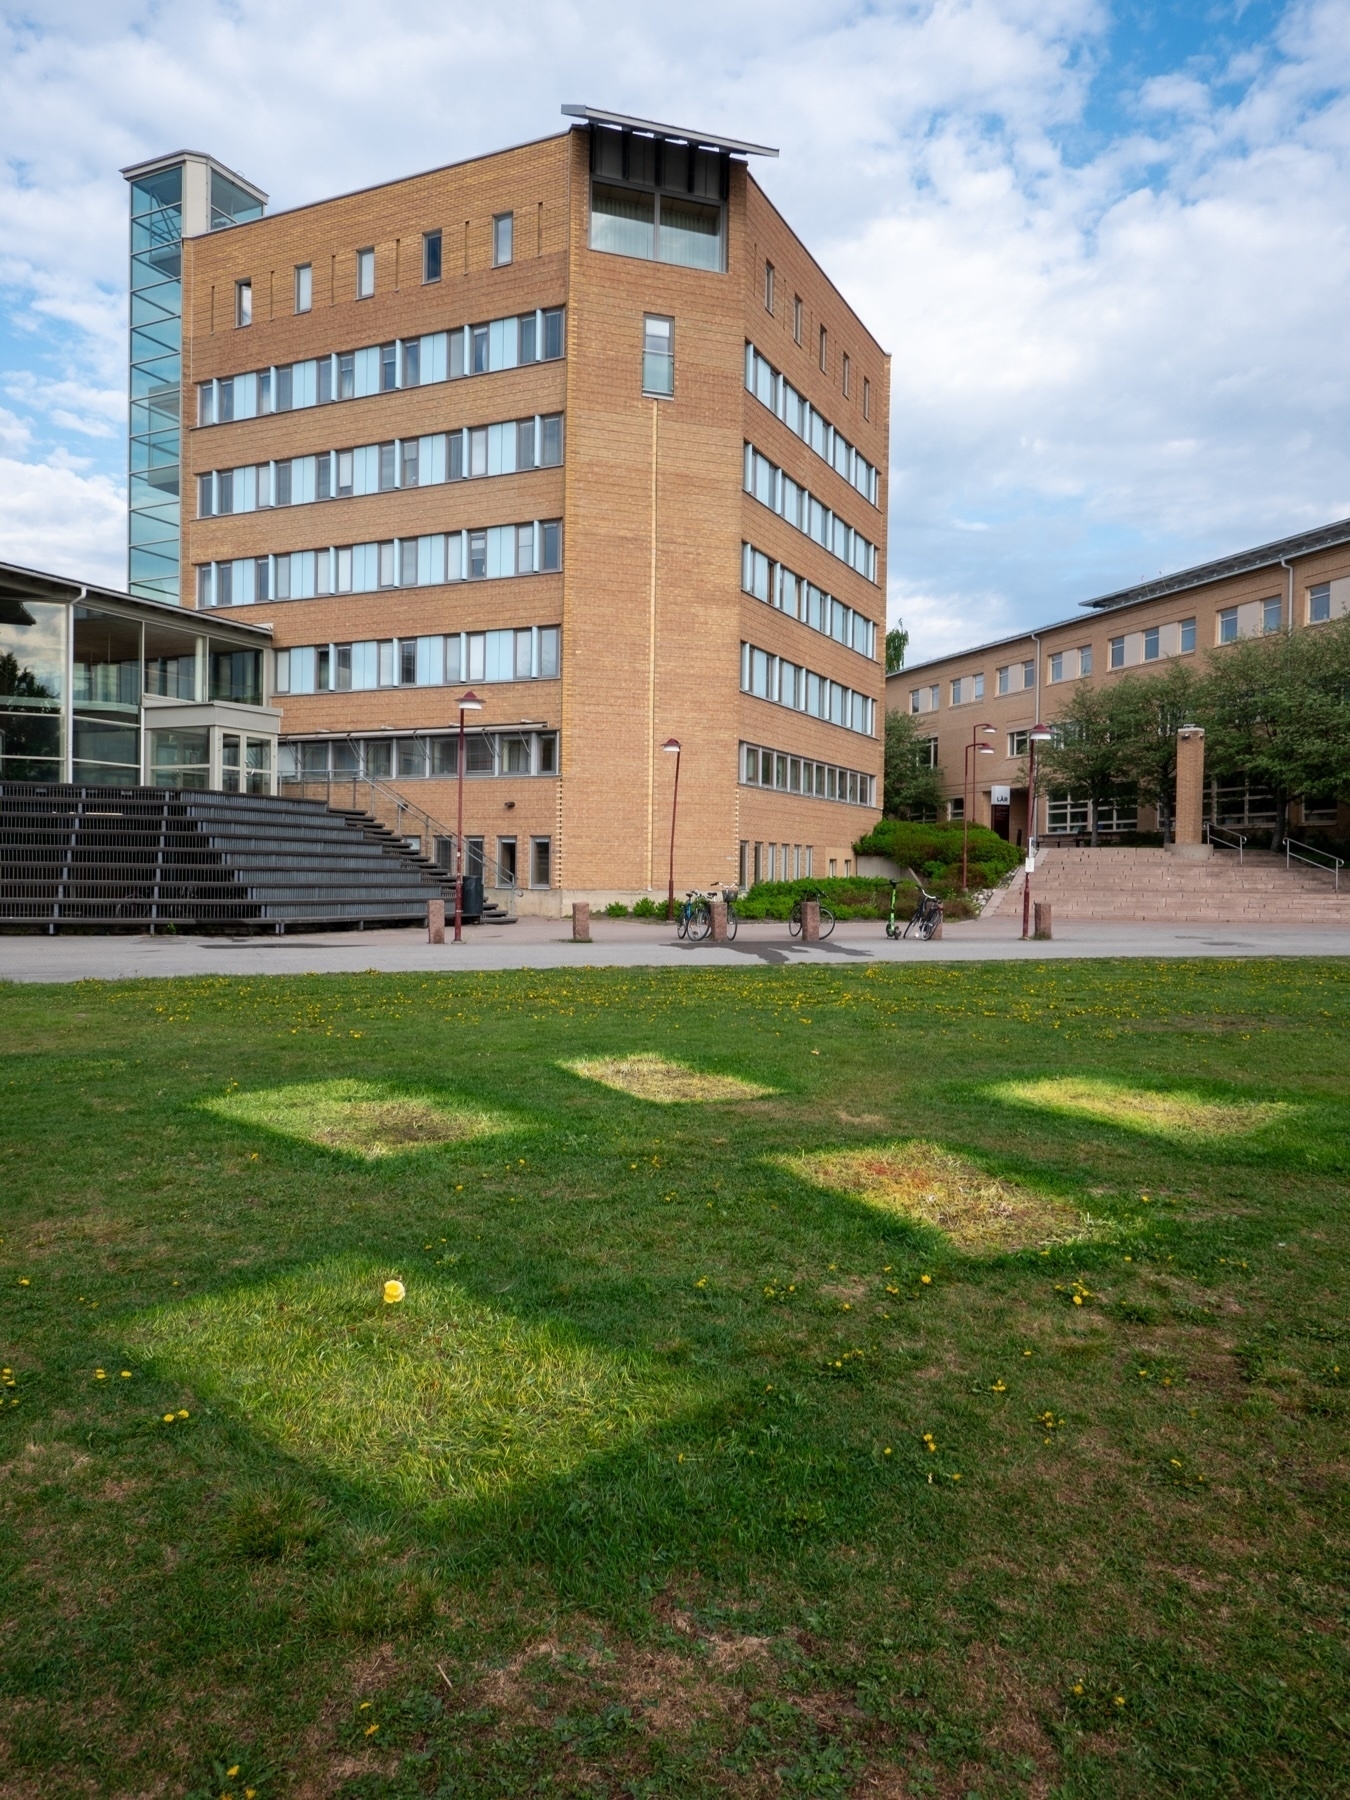 A multi-story brick building with large windows, an adjacent glass staircase tower, and another connected building in the background. The foreground features a grassy lawn with distinct square patches of light and some small yellow flowers. There are a few bicycles parked near the buildings